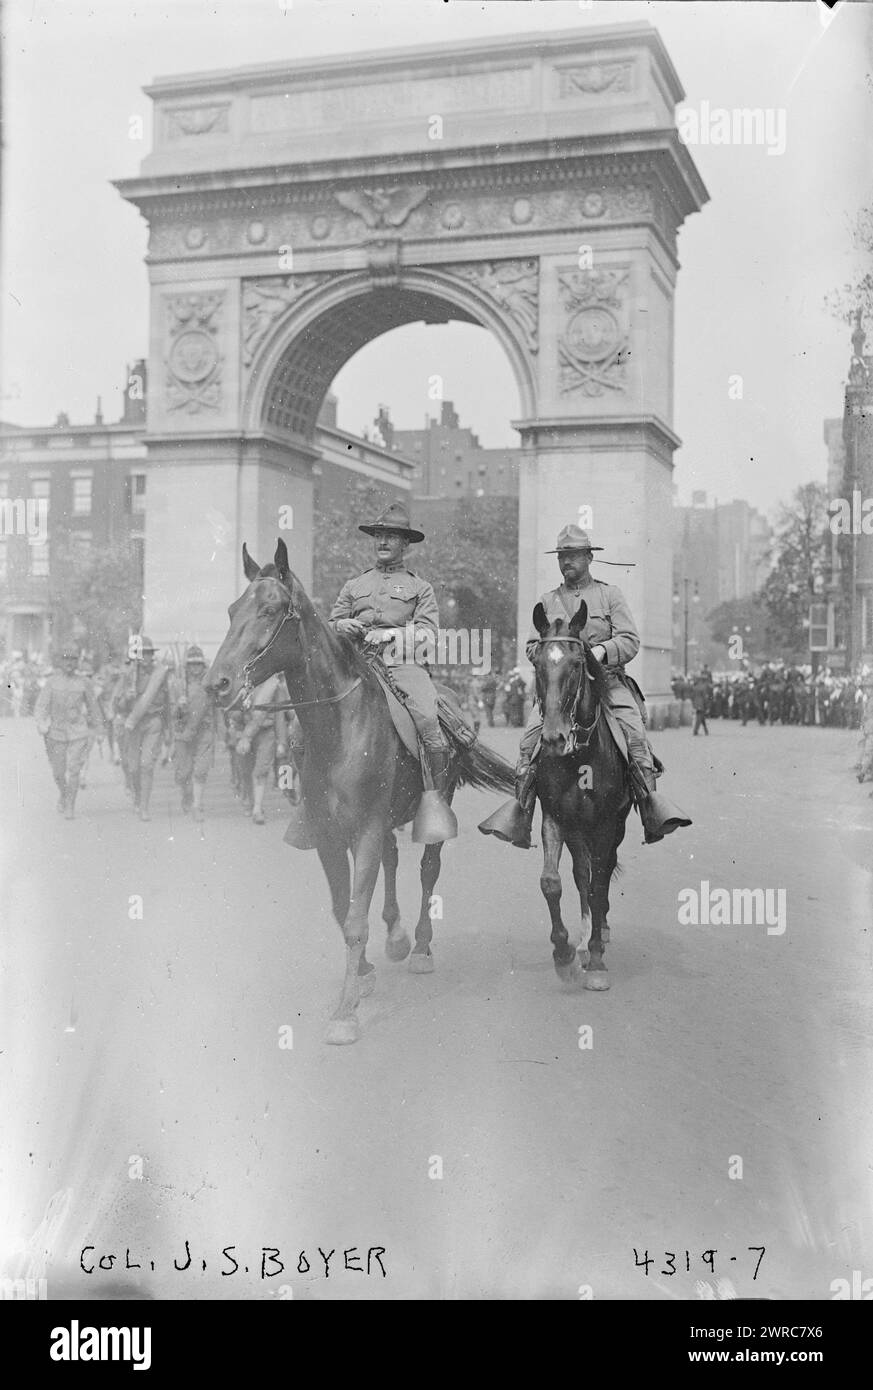 Col. J.S. Boyer, Photograph shows Colonel James S. Boyer, Commander of the First Infantry during a parade of the 27th Division (National Guard of New York) on August 30, 1917 in New York City. The Washington Square Arch is in the background., 1917 August 30, World War, 1914-1918, Glass negatives, 1 negative: glass Stock Photo